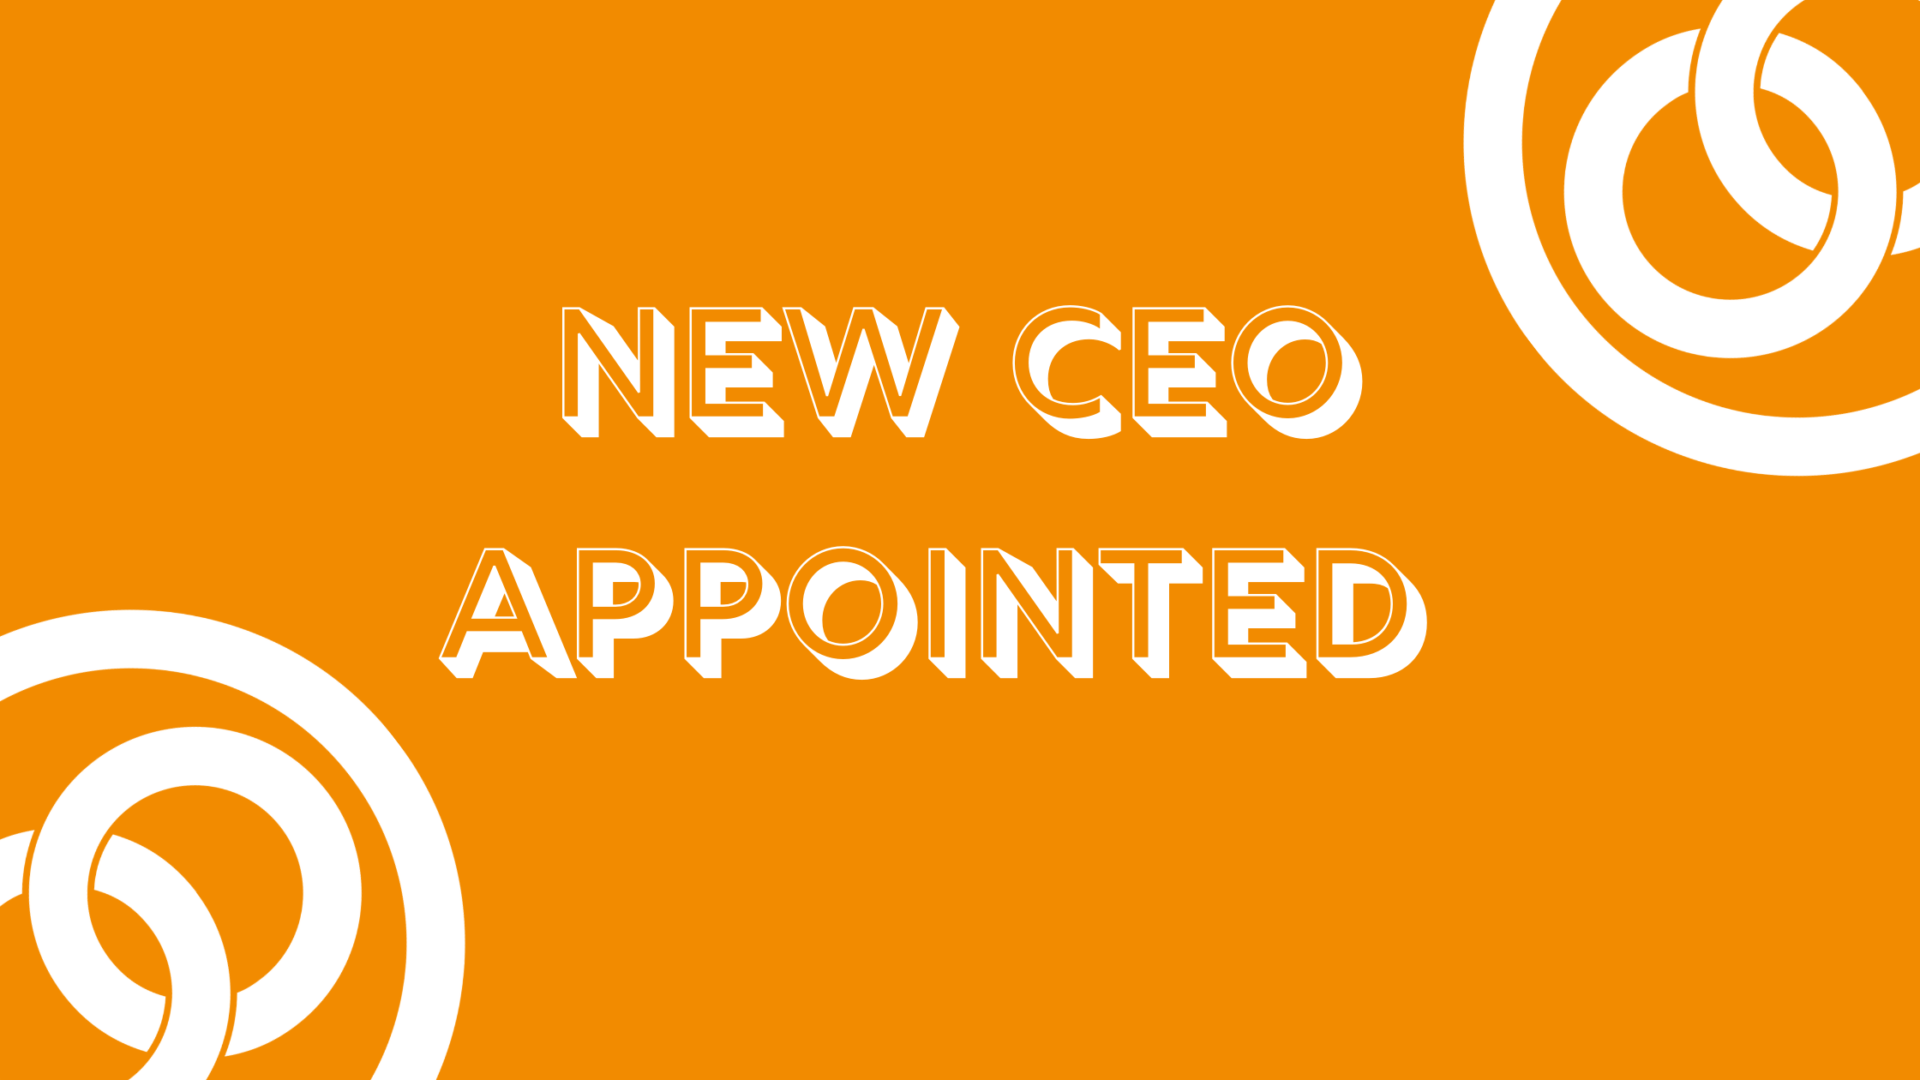 New CEO appointed